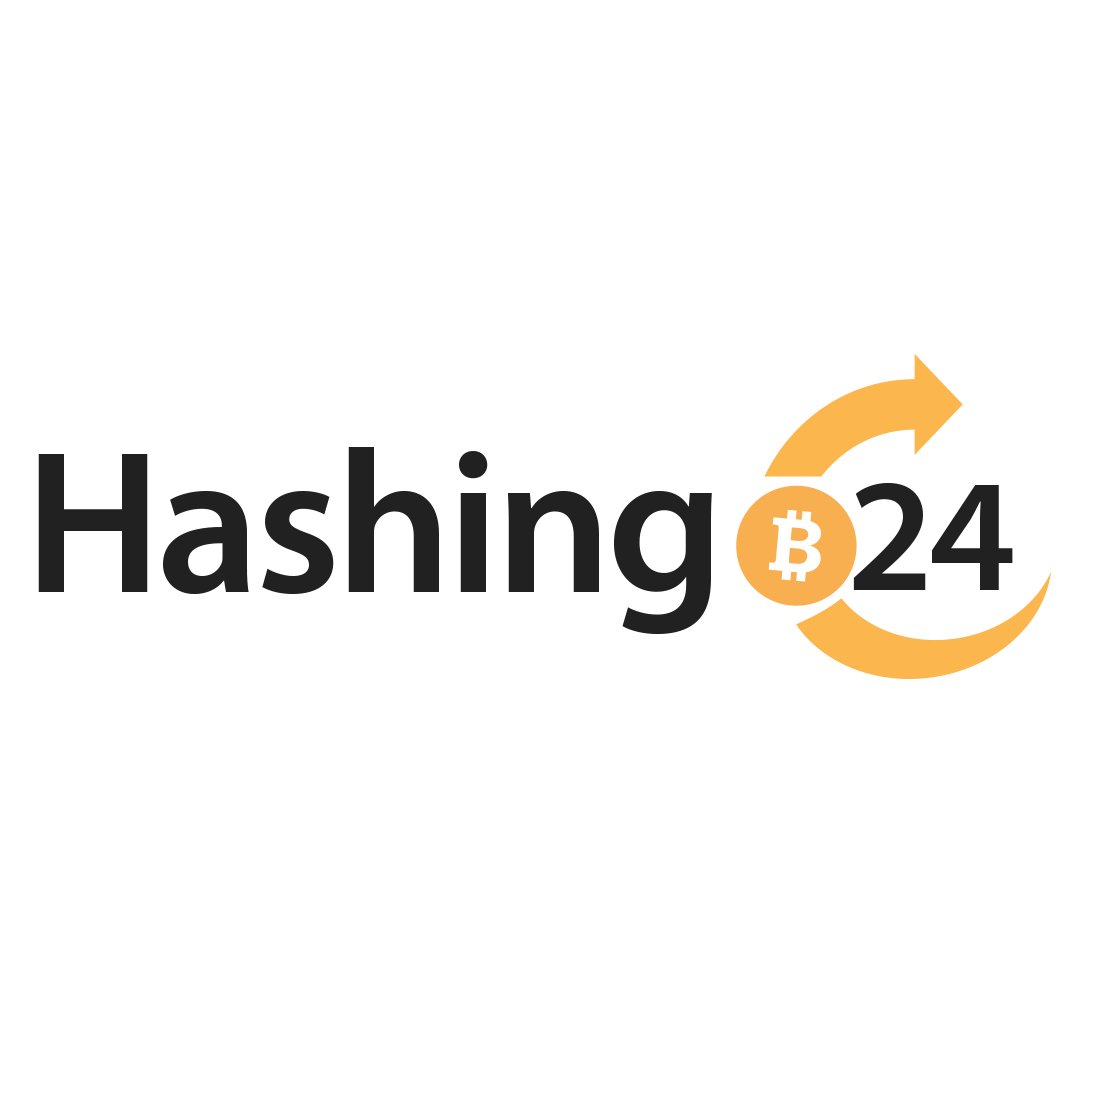 Hashing24  BTC 25TH/s 12Months Zero-Fee Cloud Mining Contract with Profitability Calculation Estimate